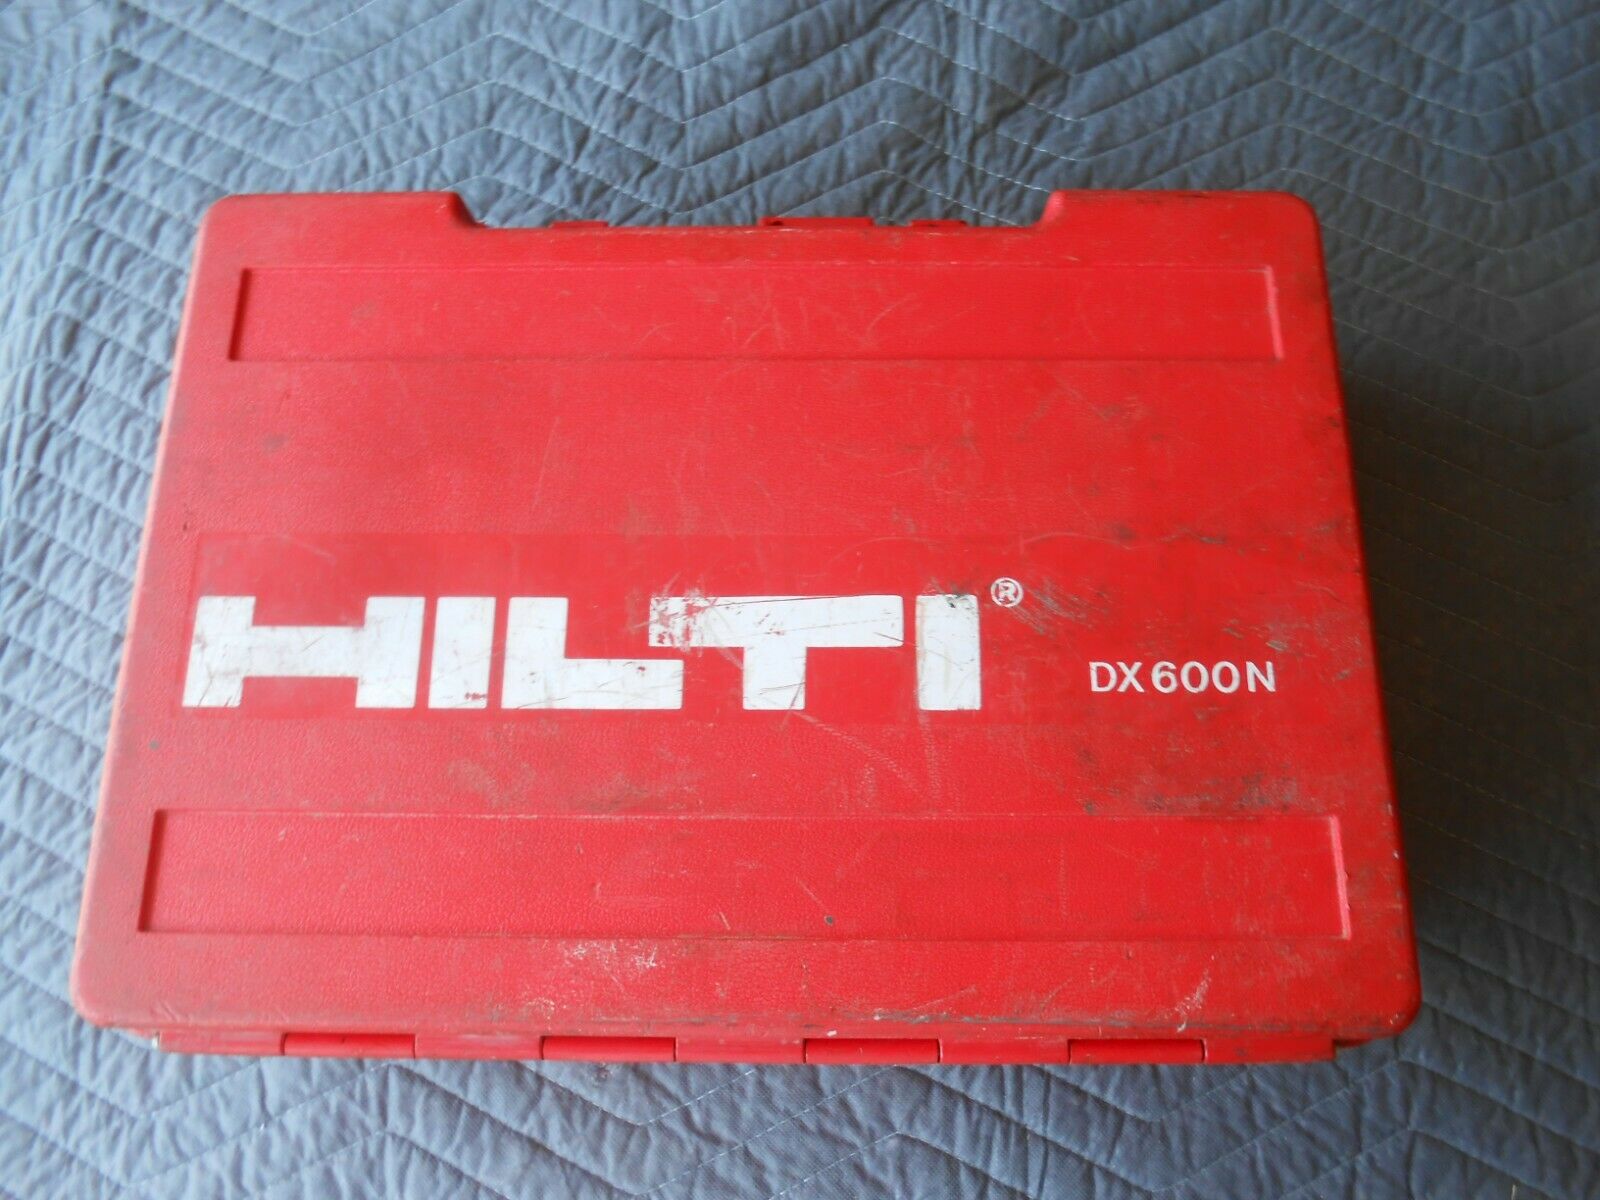 Previously Owned Hilti Dx600n Powder Actuated Fastener Tool In Case